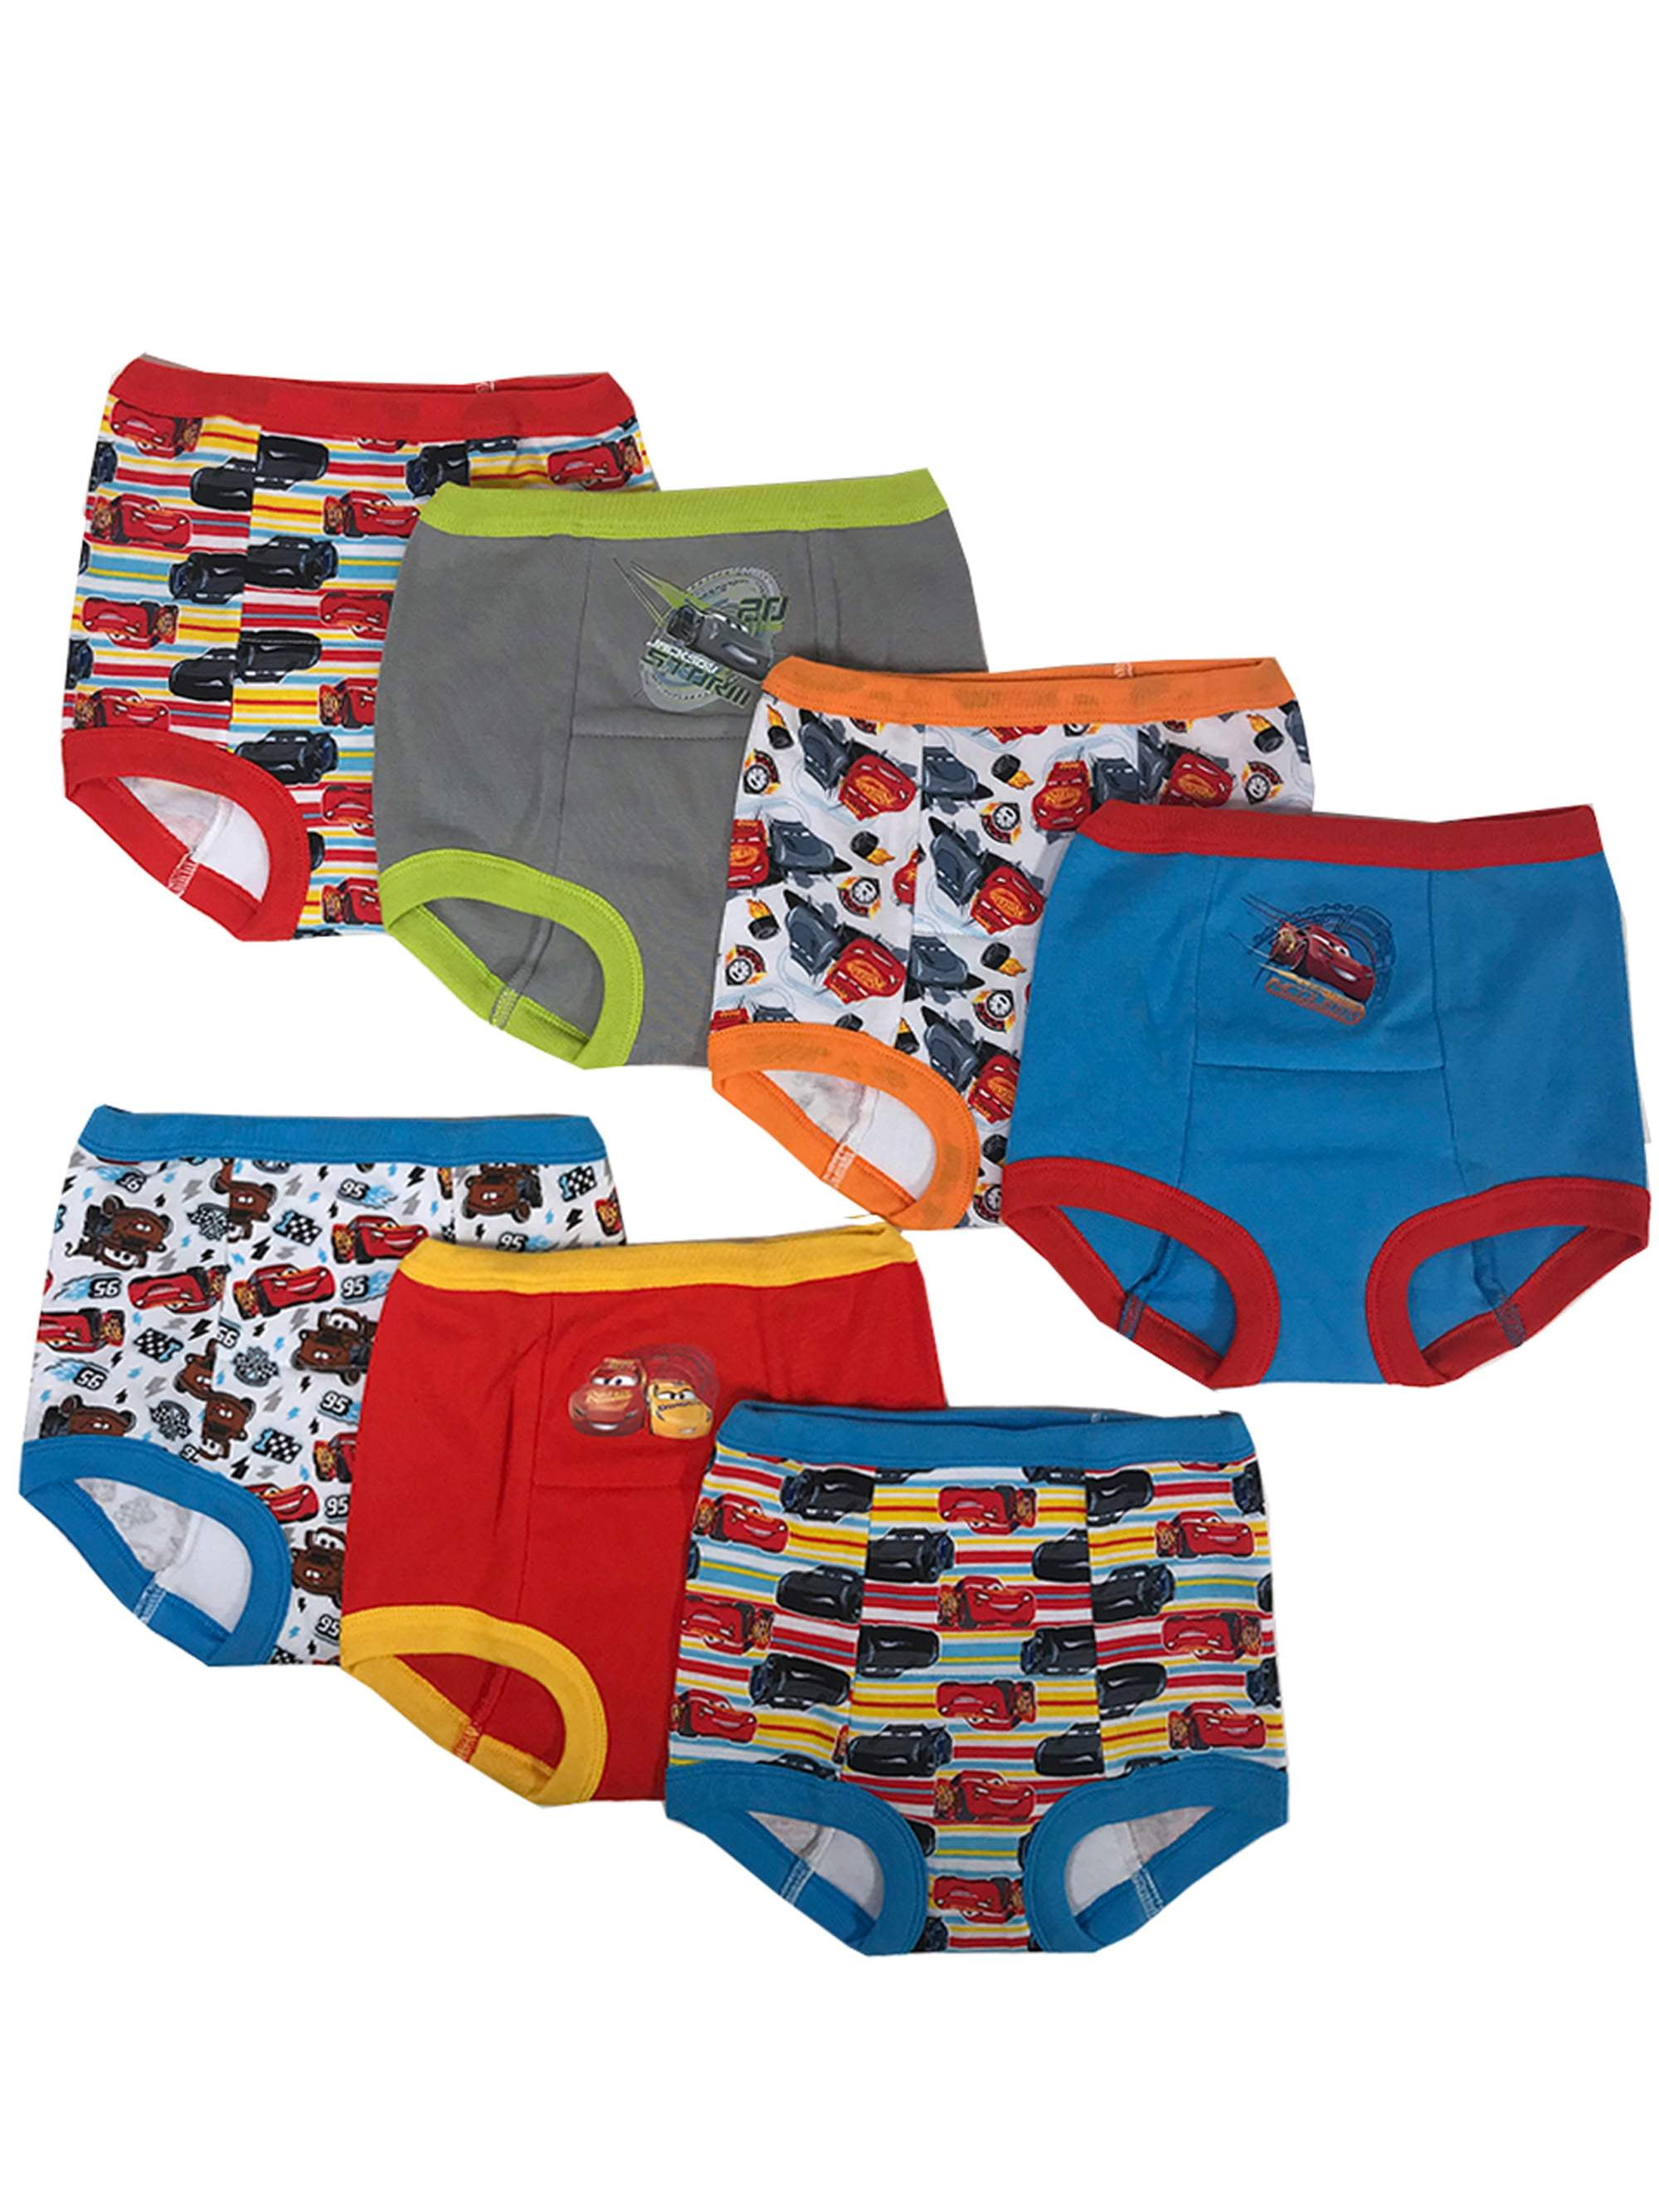 Disney Mickey Mouse Boys Potty Training Pants 7-pack Underwear Toddler 